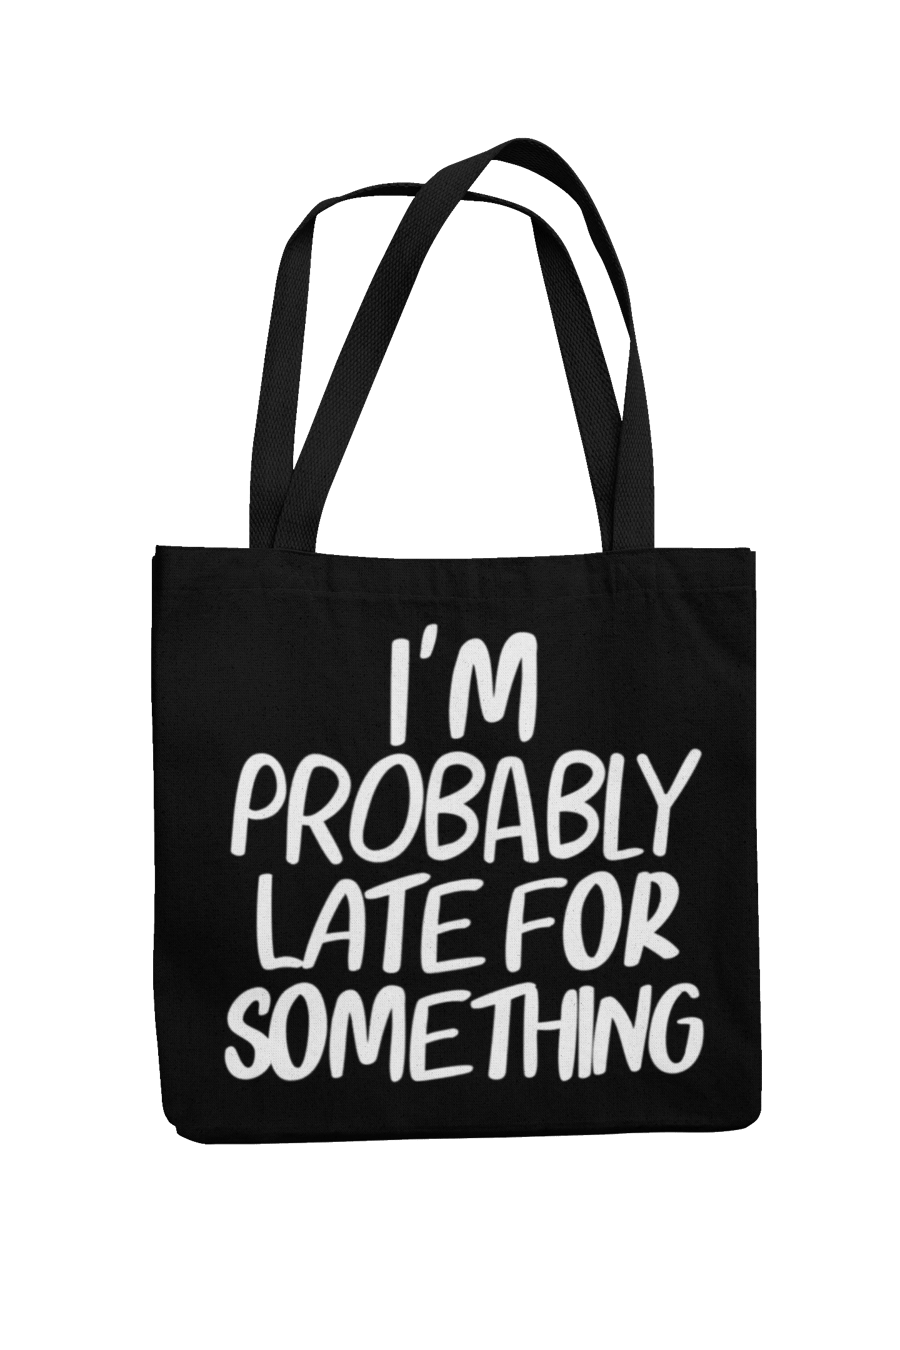 I'm Probably Late For Something - Novelty Tote Bag